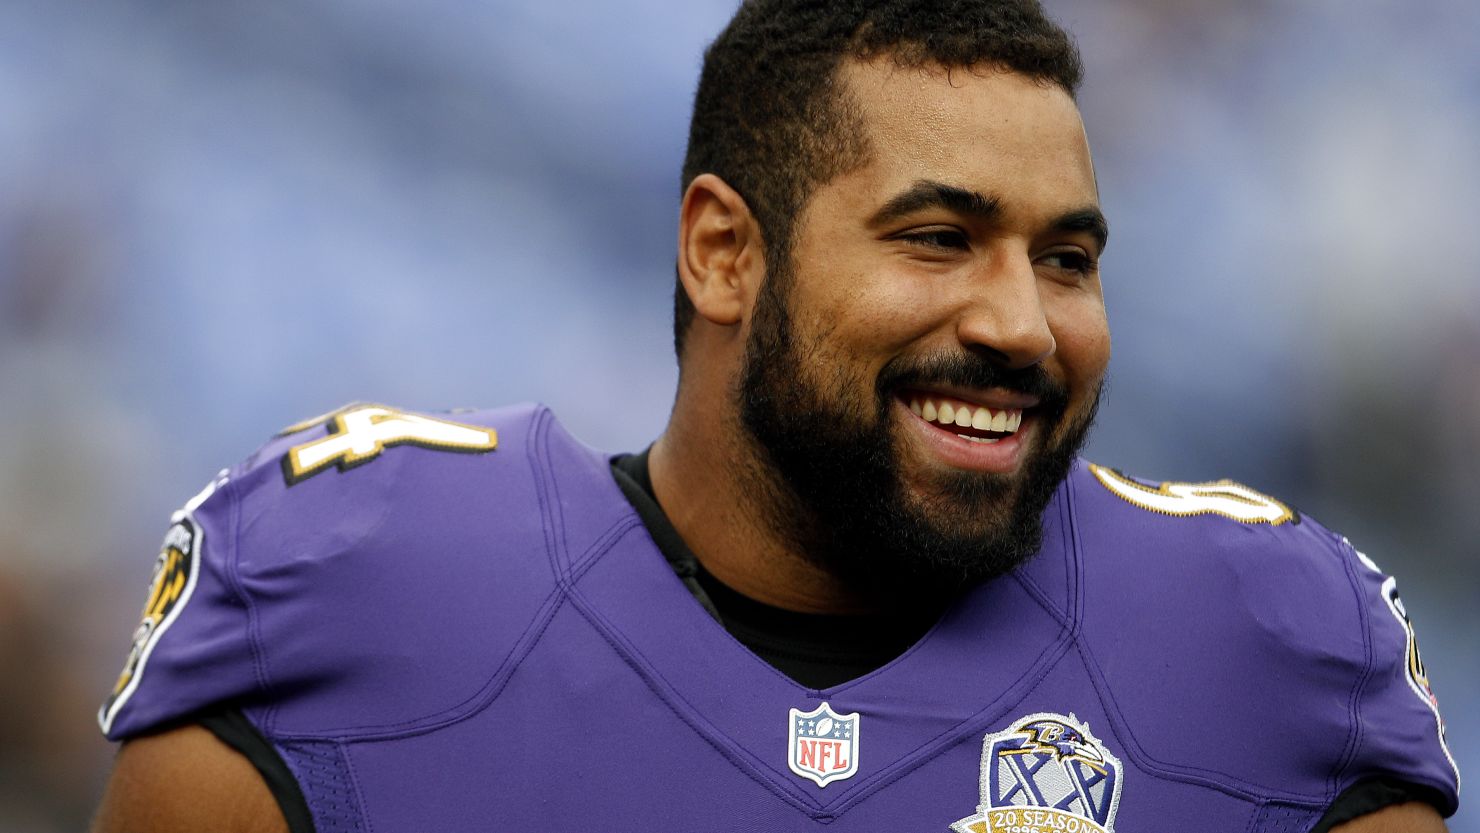 Baltimore Ravens offensive lineman John Urschel before a game against the San Diego Chargers at M&T Bank Stadium on November 1, 2015 in Baltimore, Maryland.